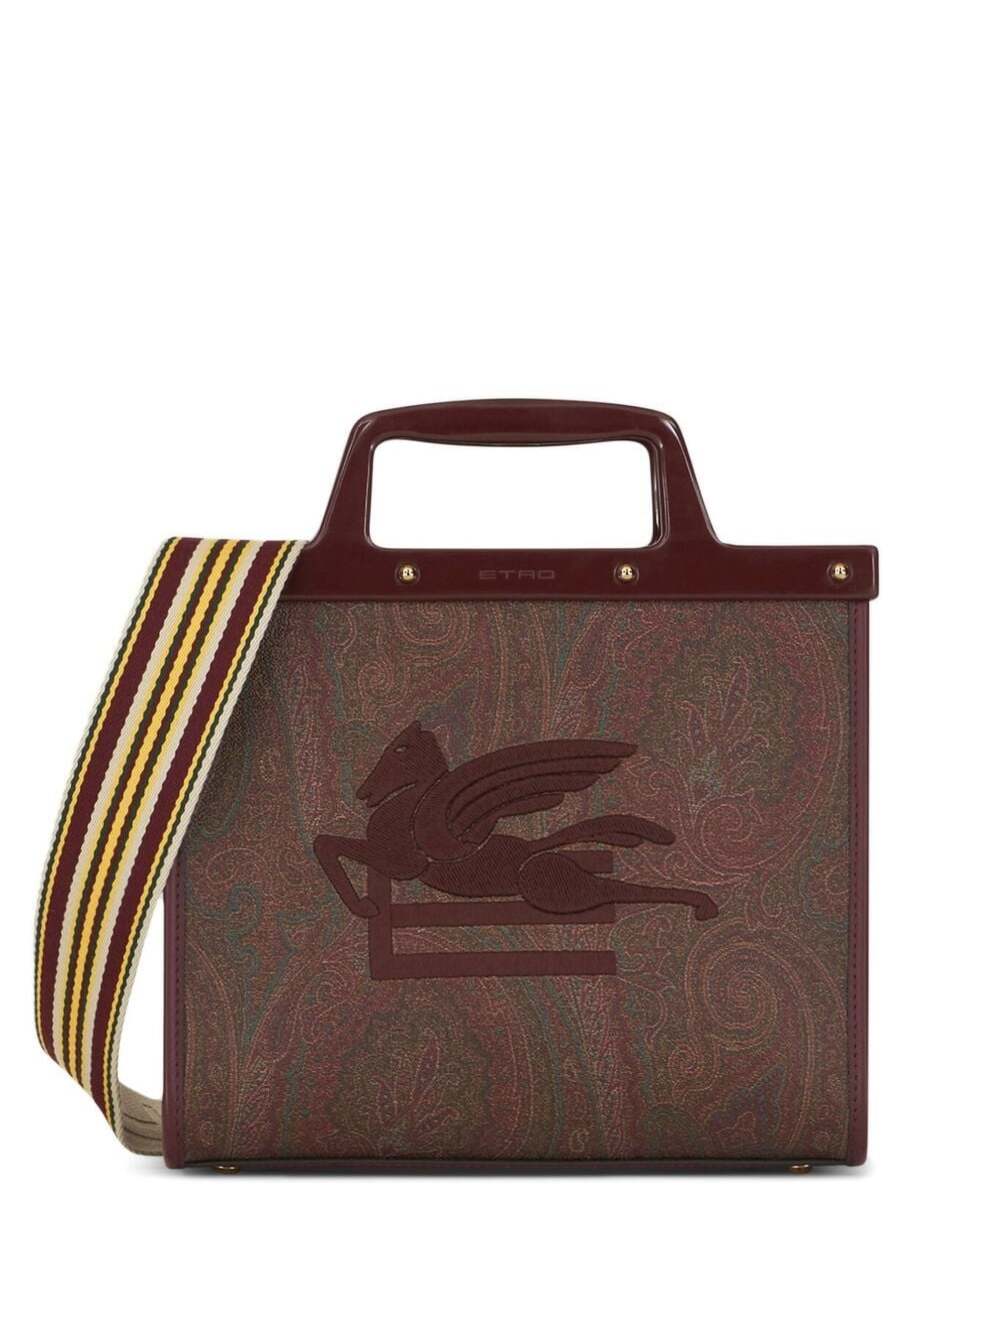 ETRO LOVE TROTTER BROWN SHOPPER BAG WITH RIBBON SHOULDER STRAP AND EMBROIDERED LOO IN COTTON BLEND WOMAN